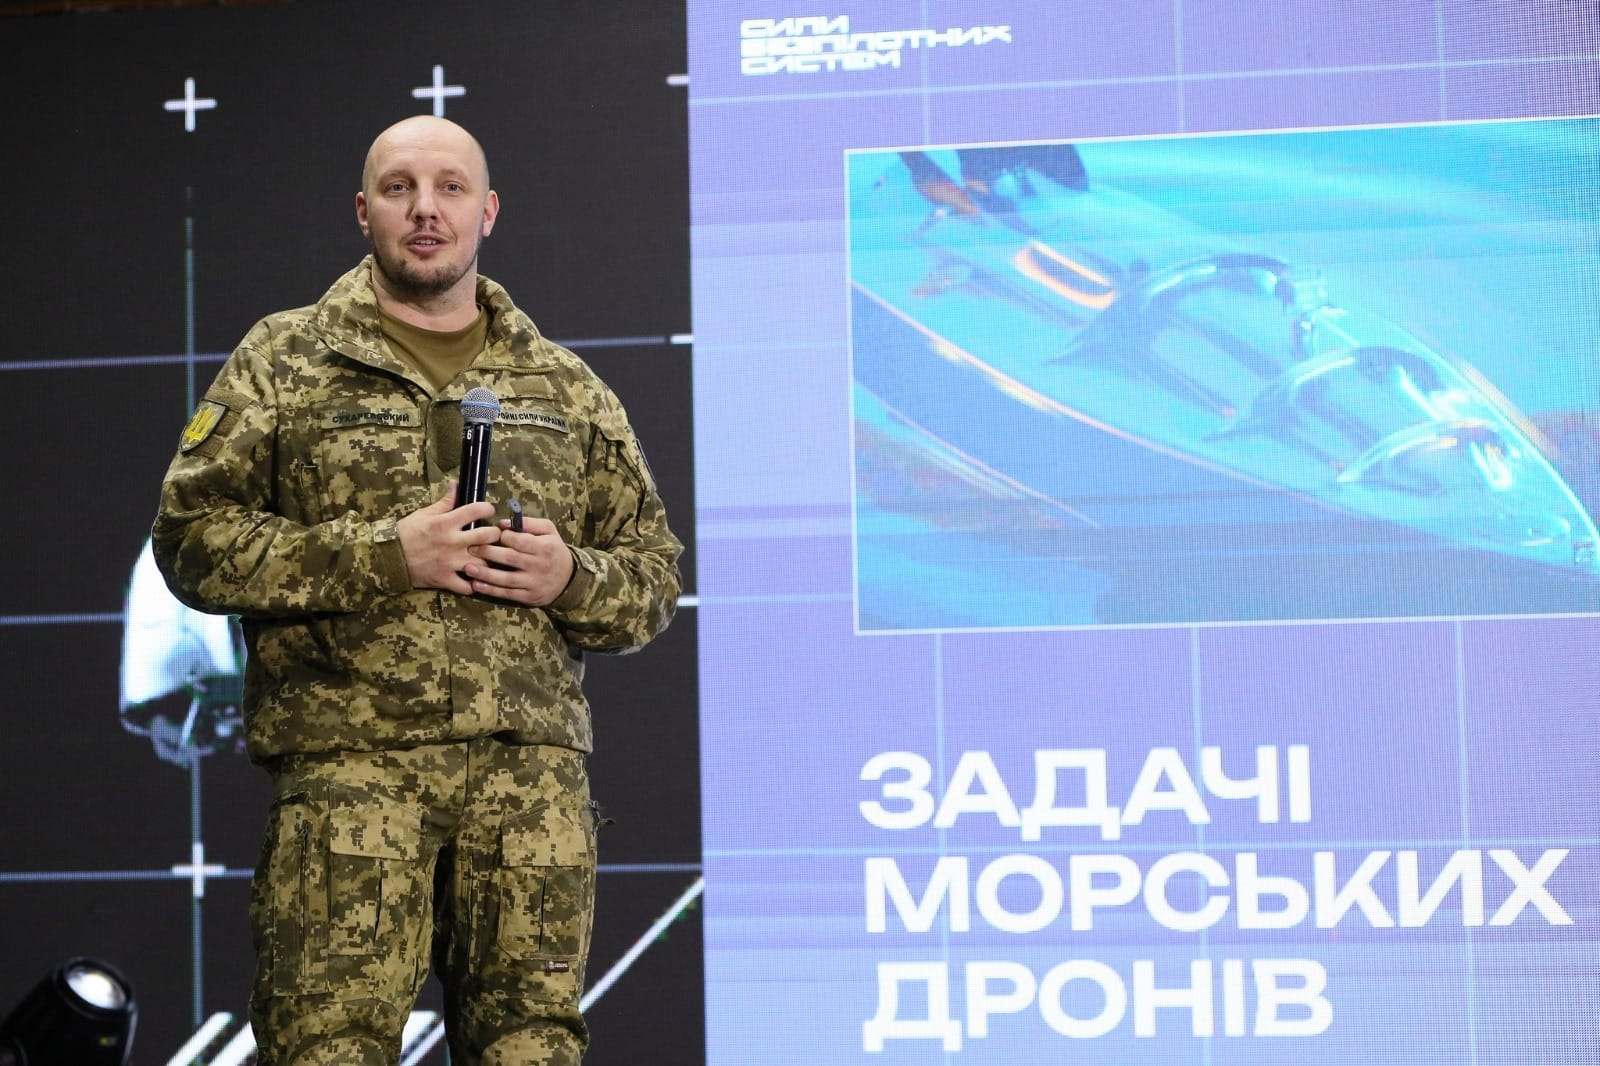 The Armed Forces of Ukraine are establishing a new branch of the military - the Unmanned Systems Forces